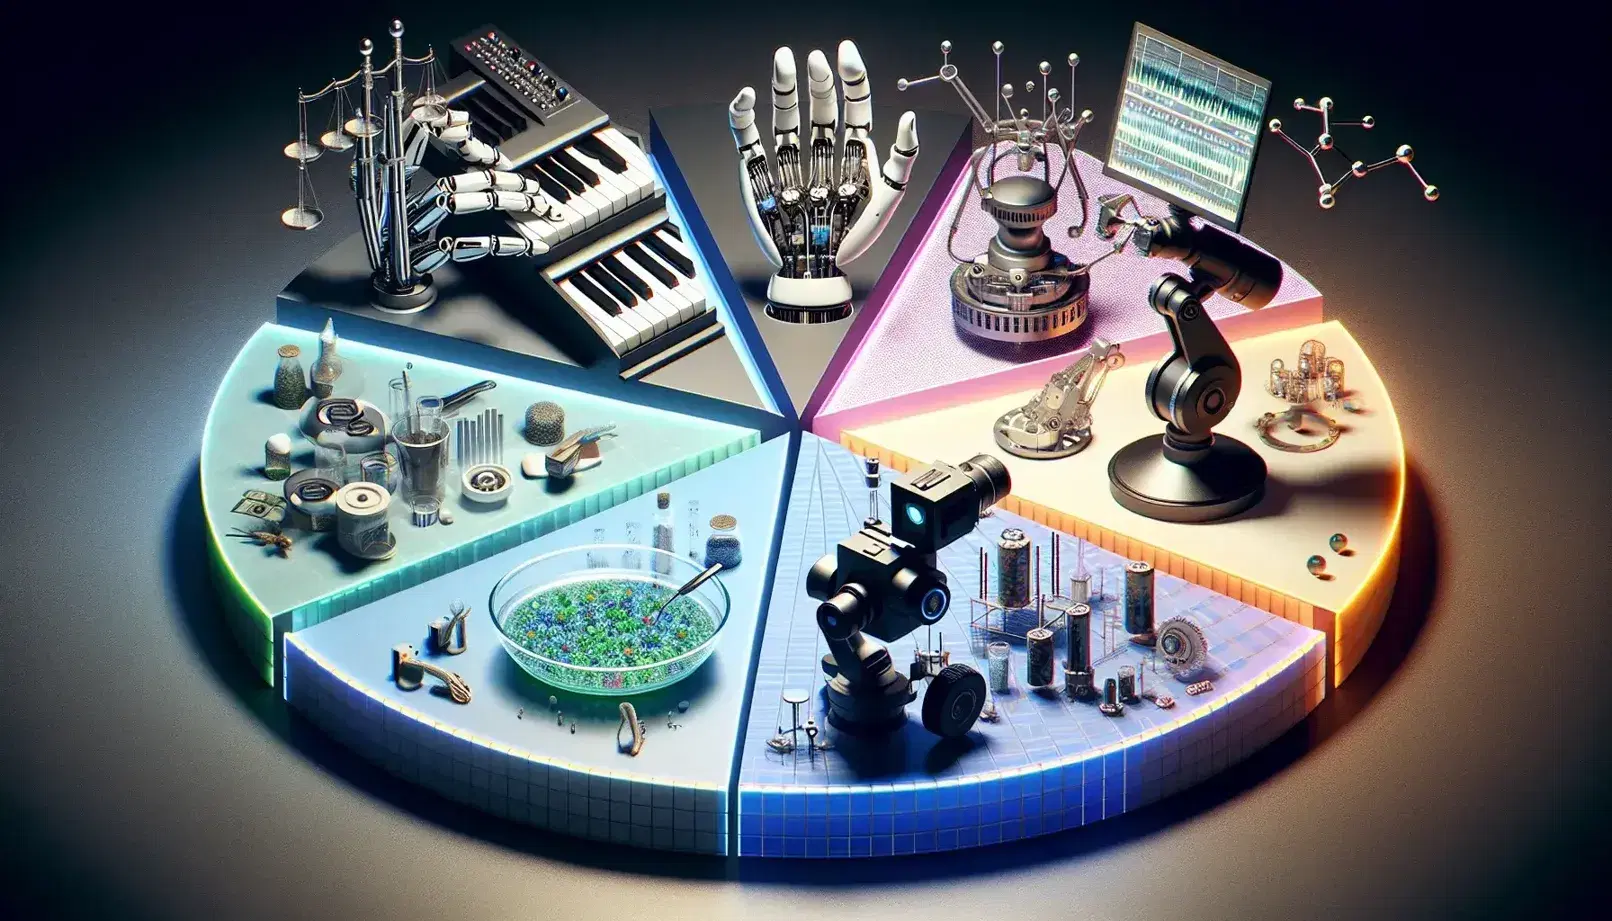 Pie-shaped collage with five sectors: robotic hand on table, camera with gimbal, robotic arm in laboratory, industrial automation and table with 3D architectural model.